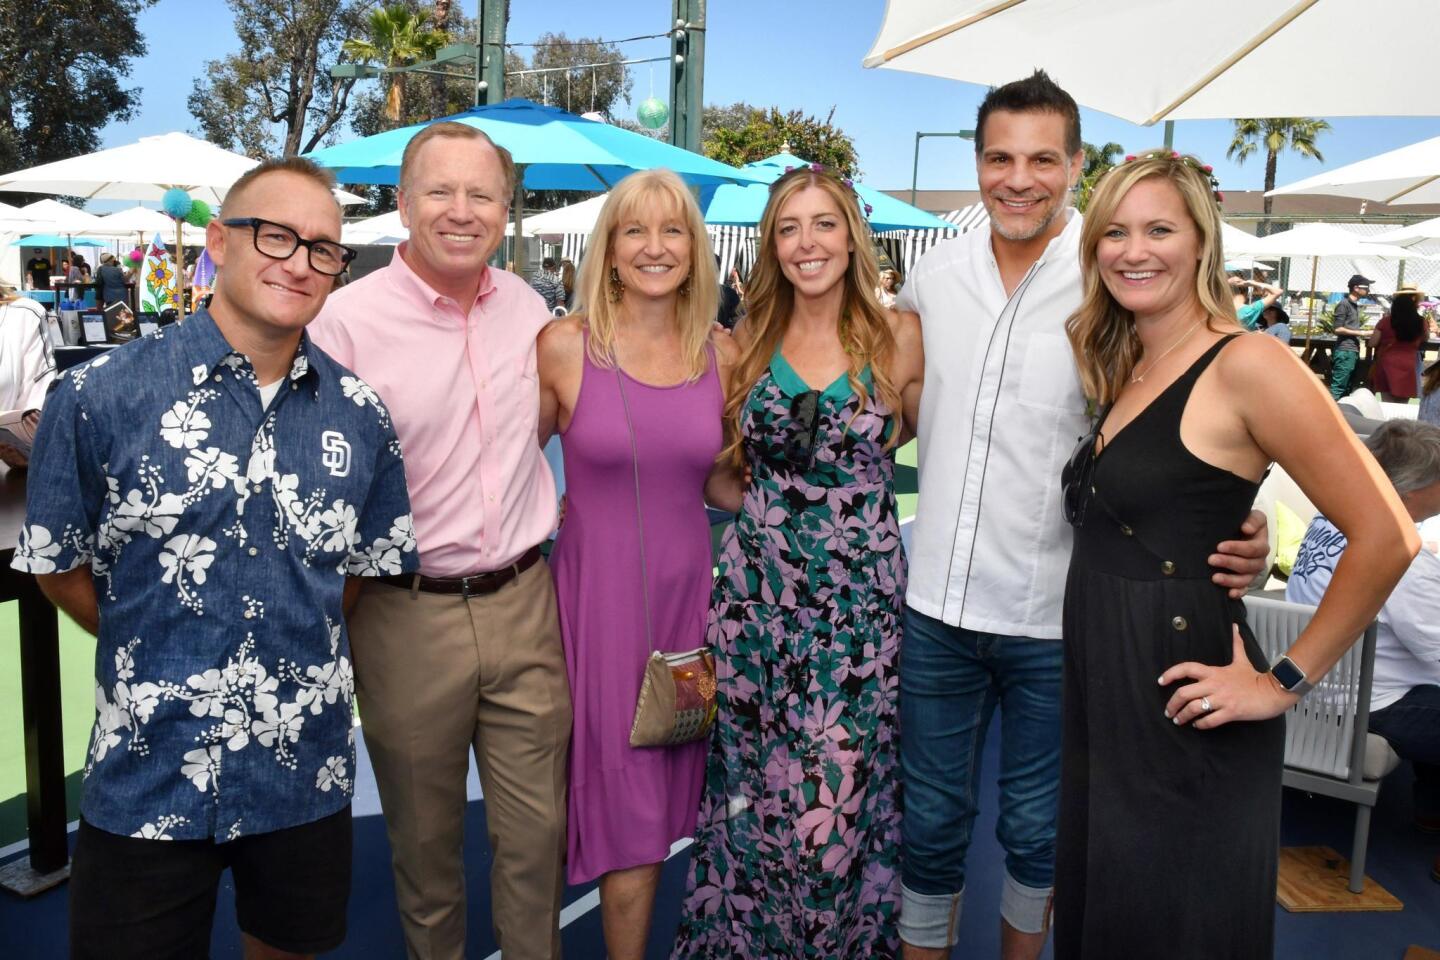 Chris Cote (even emcee), Vince Hall (FSD CEO) and Tracy Skaddan, Allison Glader (event host), Angelo Sosa (Death by Tequila chef), Diane End (event host)